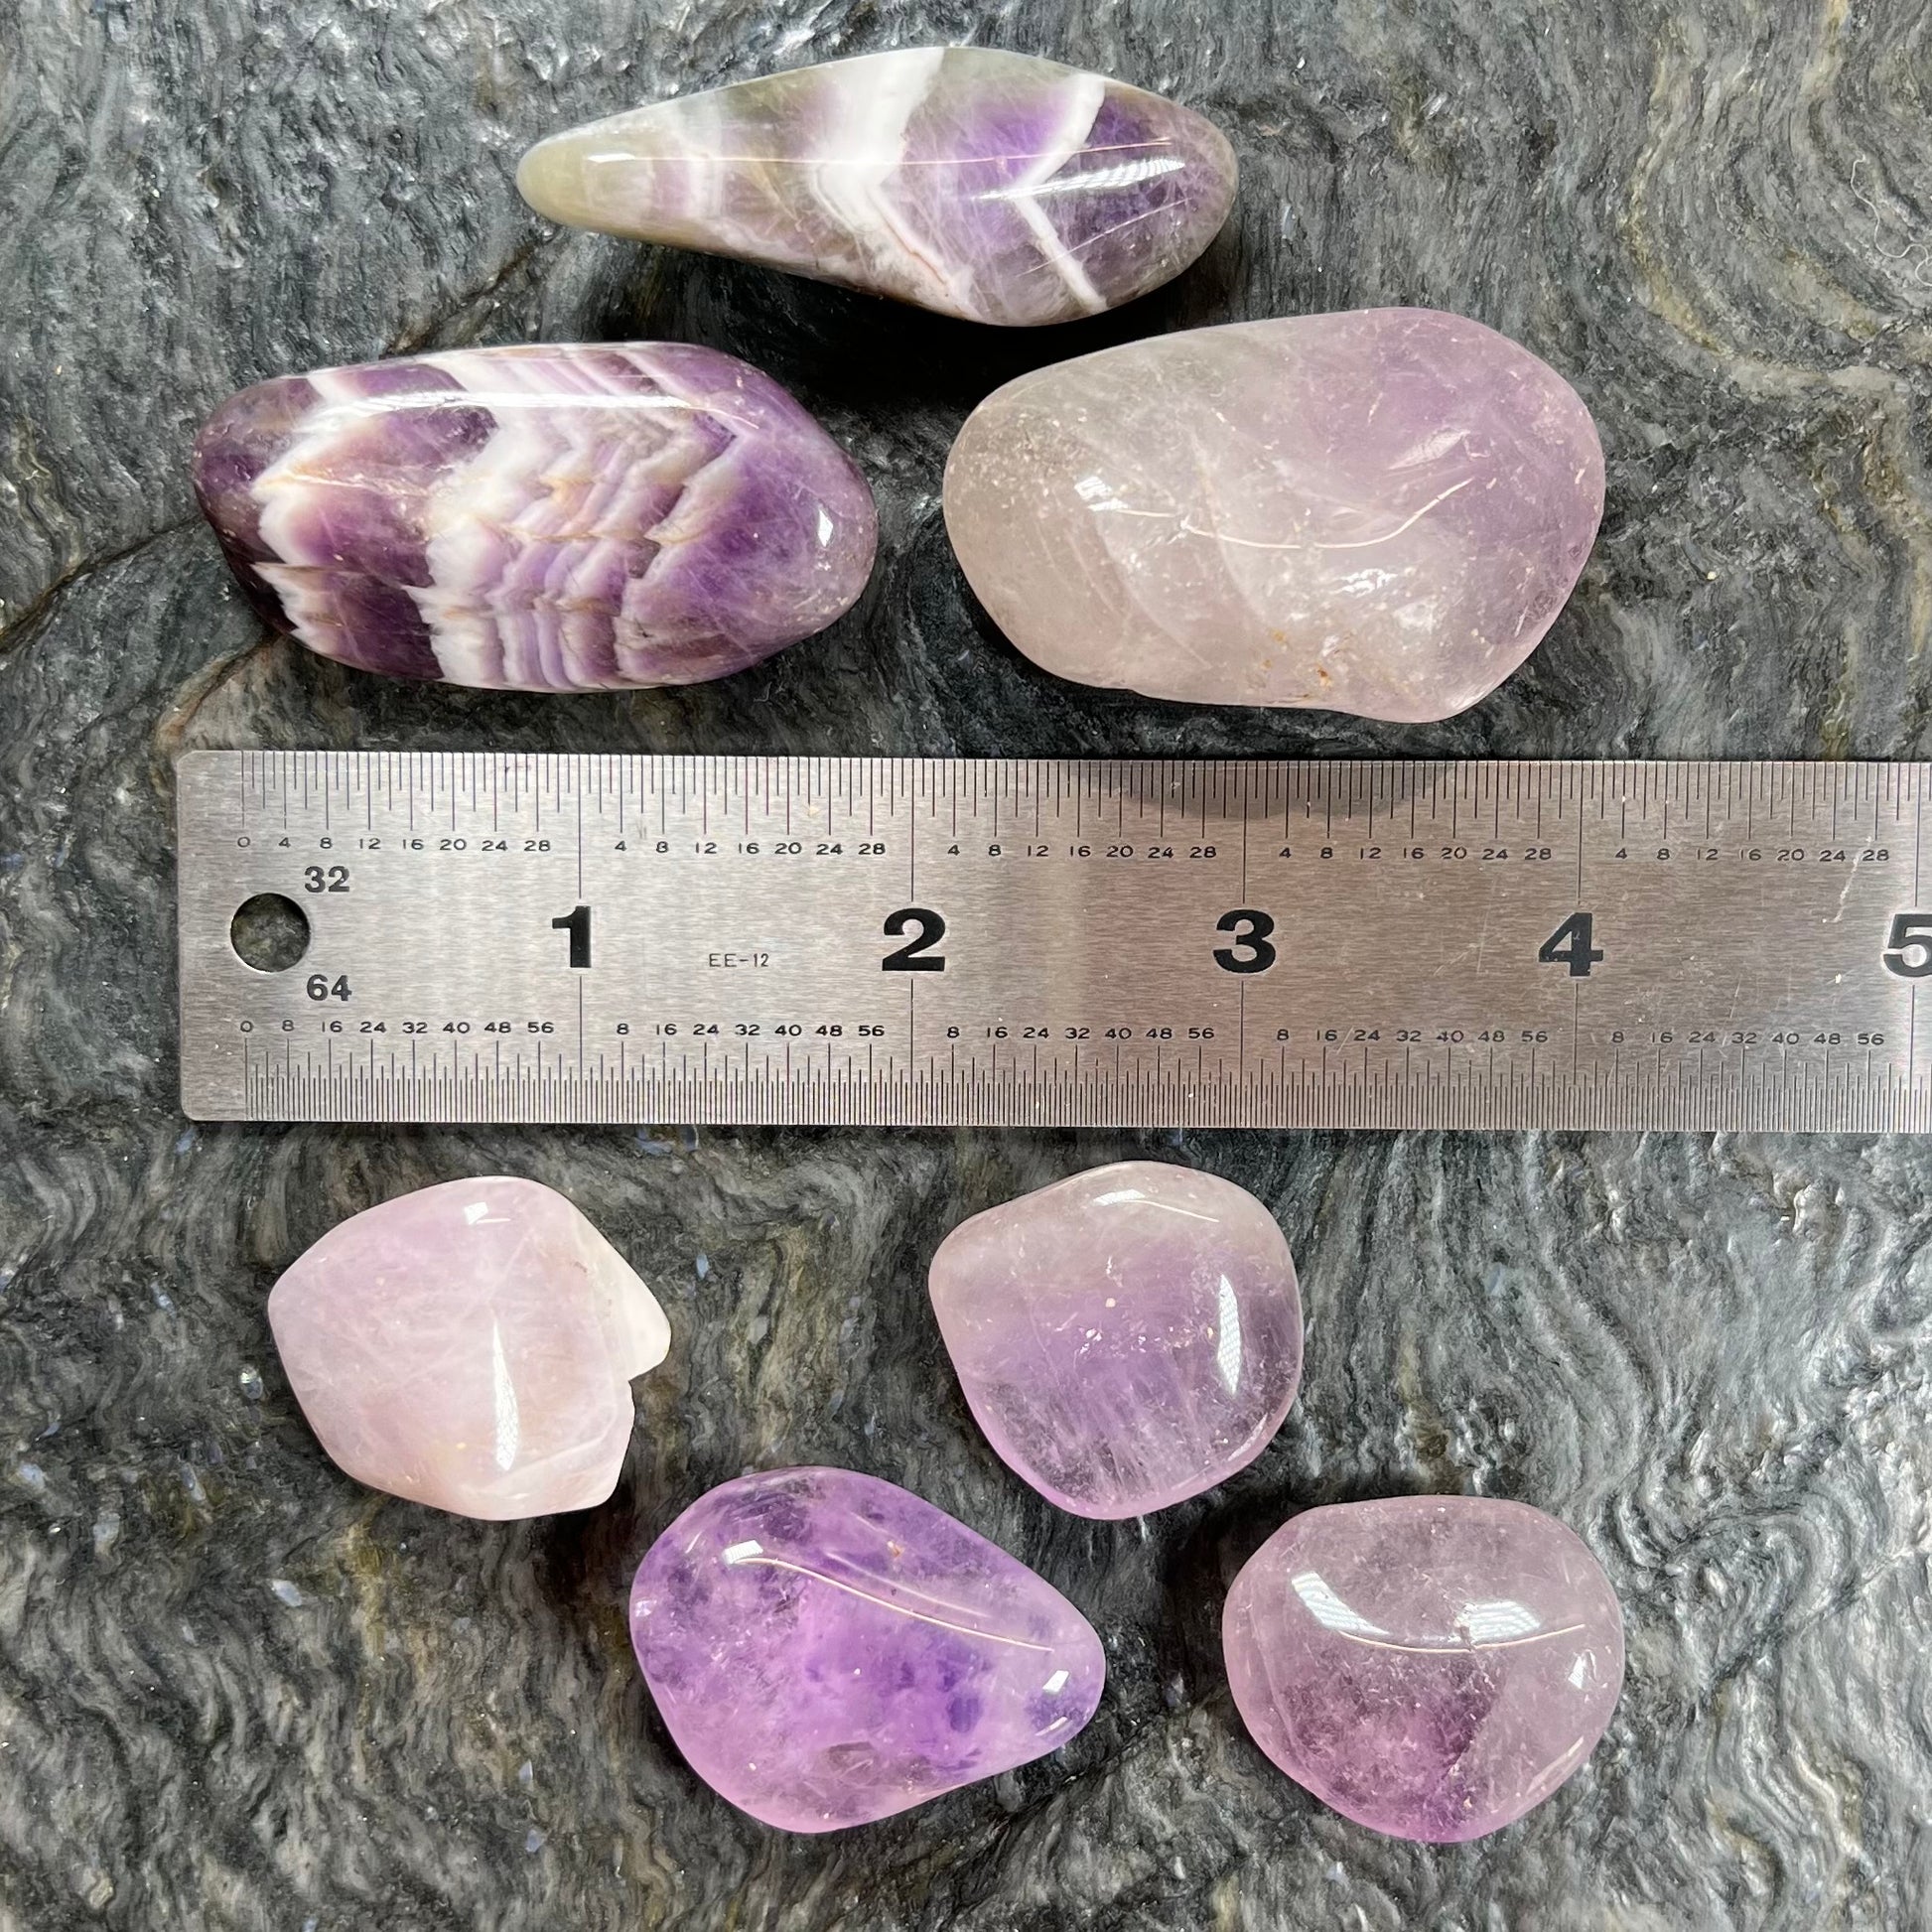 Palm sized, commercial grade, tumbled amethyst stones.